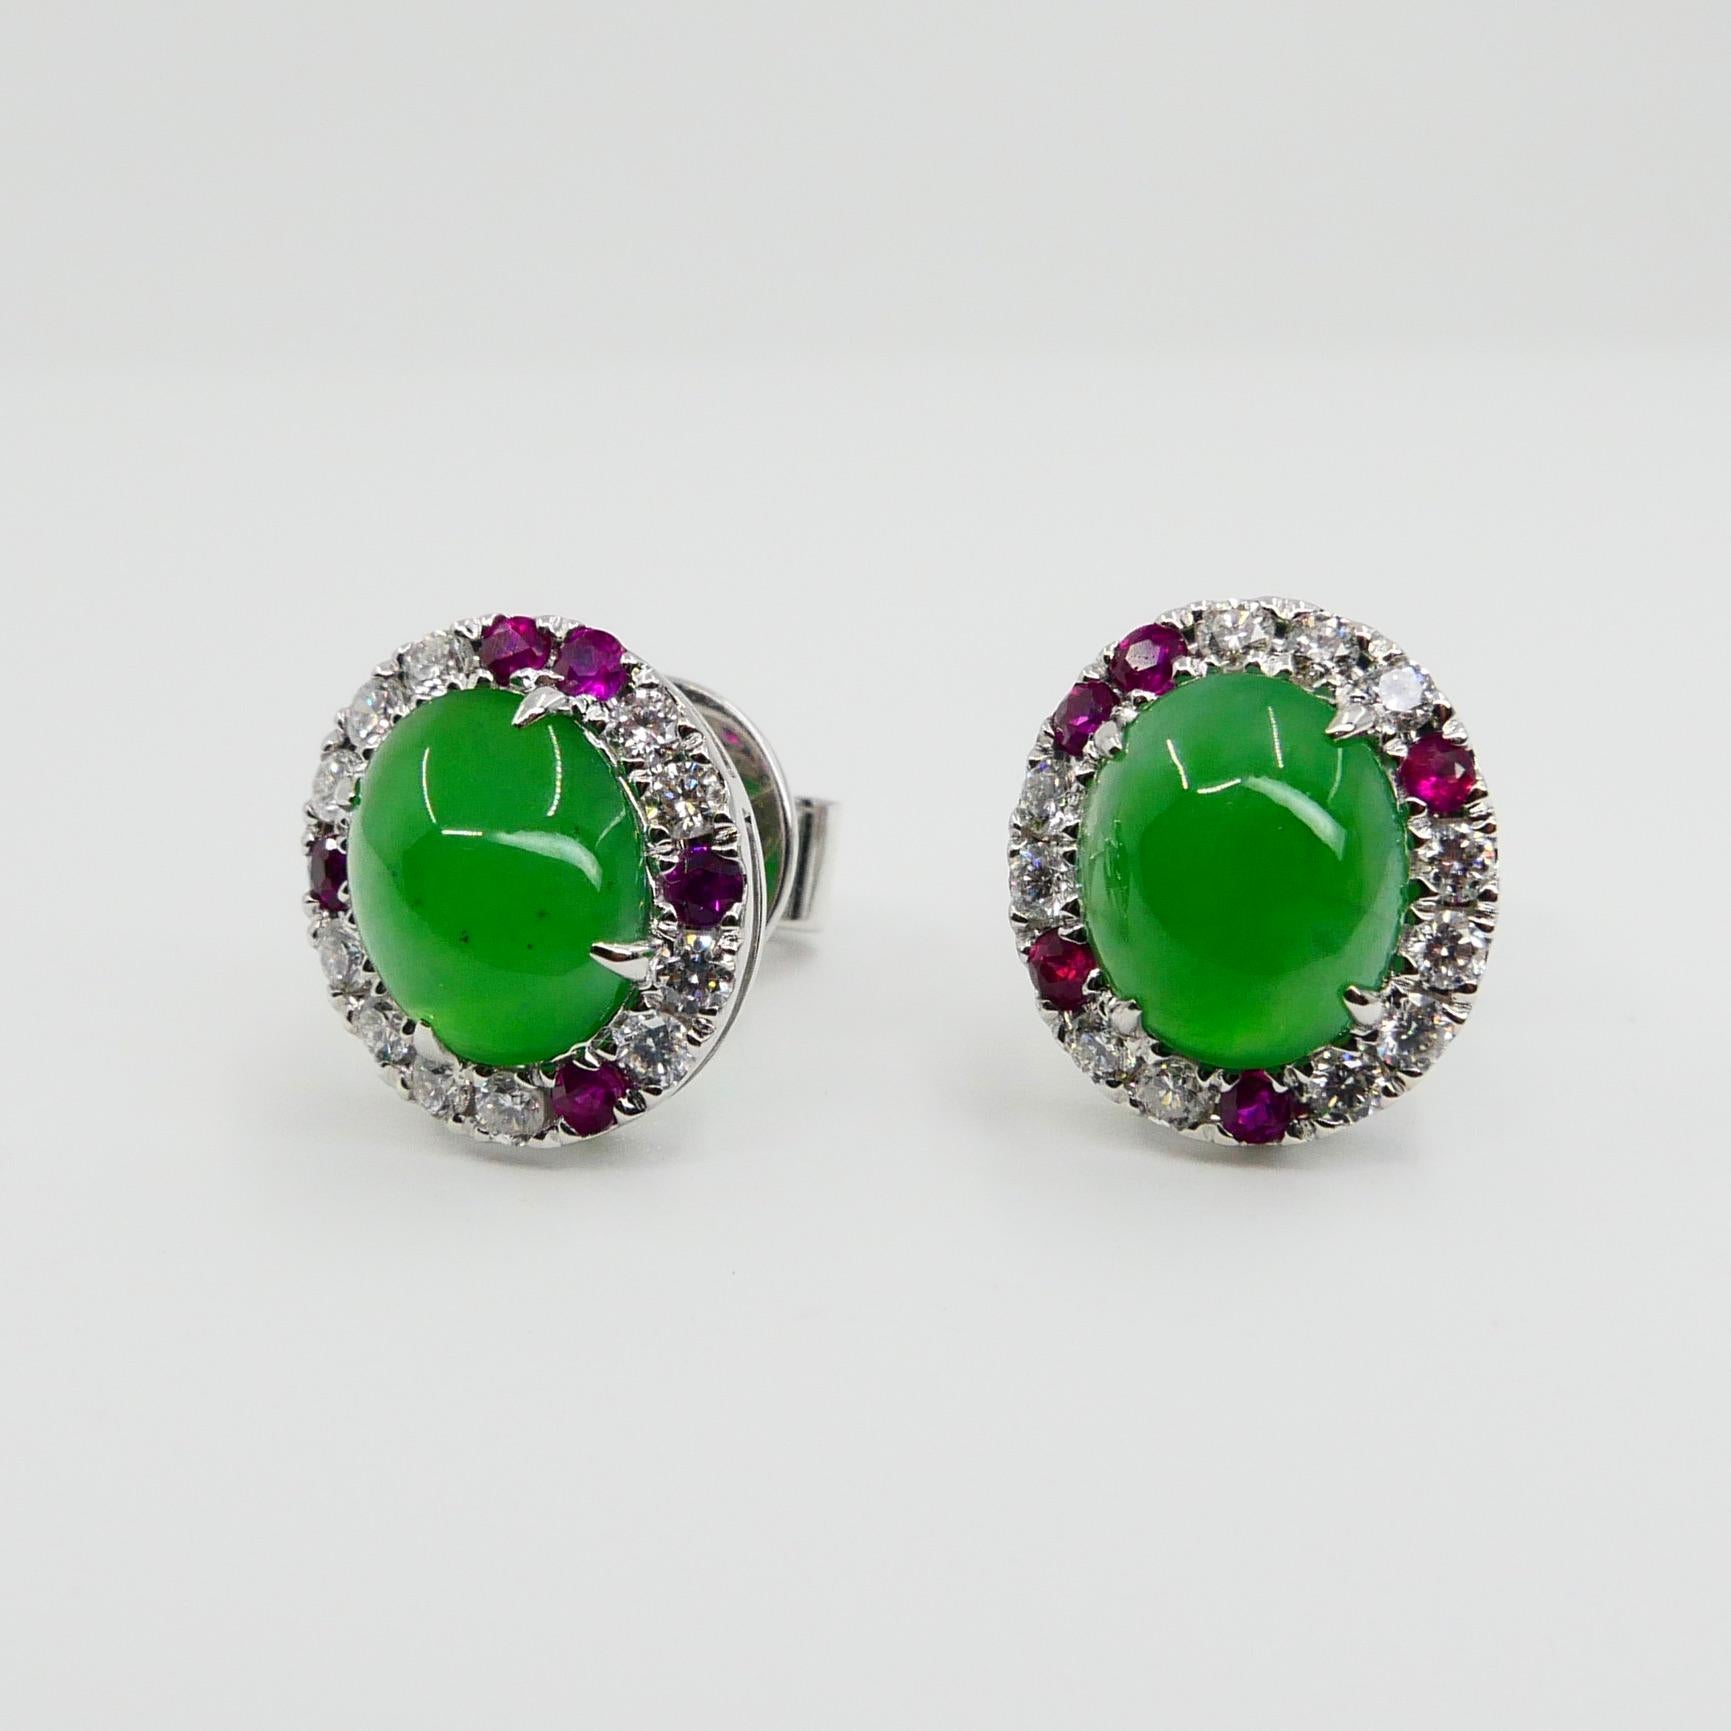 Certified Natural Type A Jade, Ruby and Diamond Stud Earrings, Apple Green Color 8